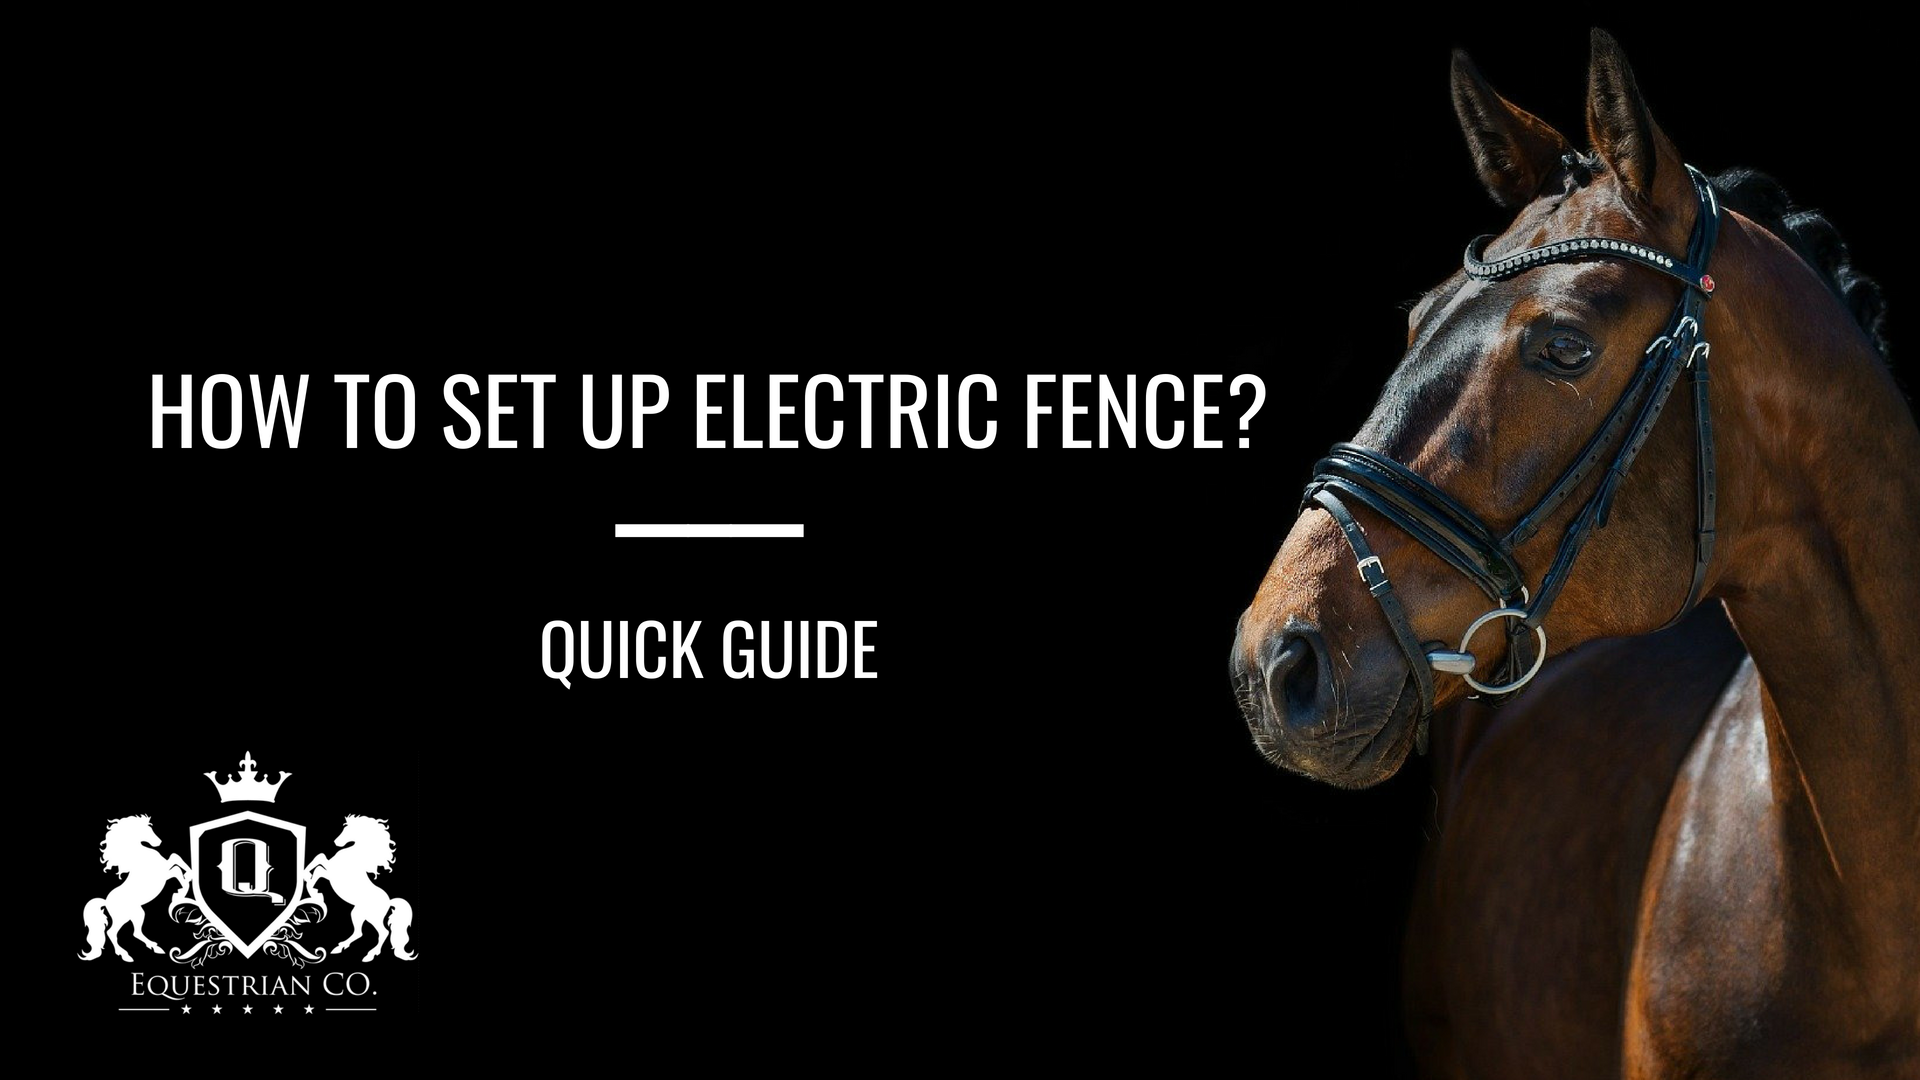 How to Set Up an Electric Fence? Quick Guide